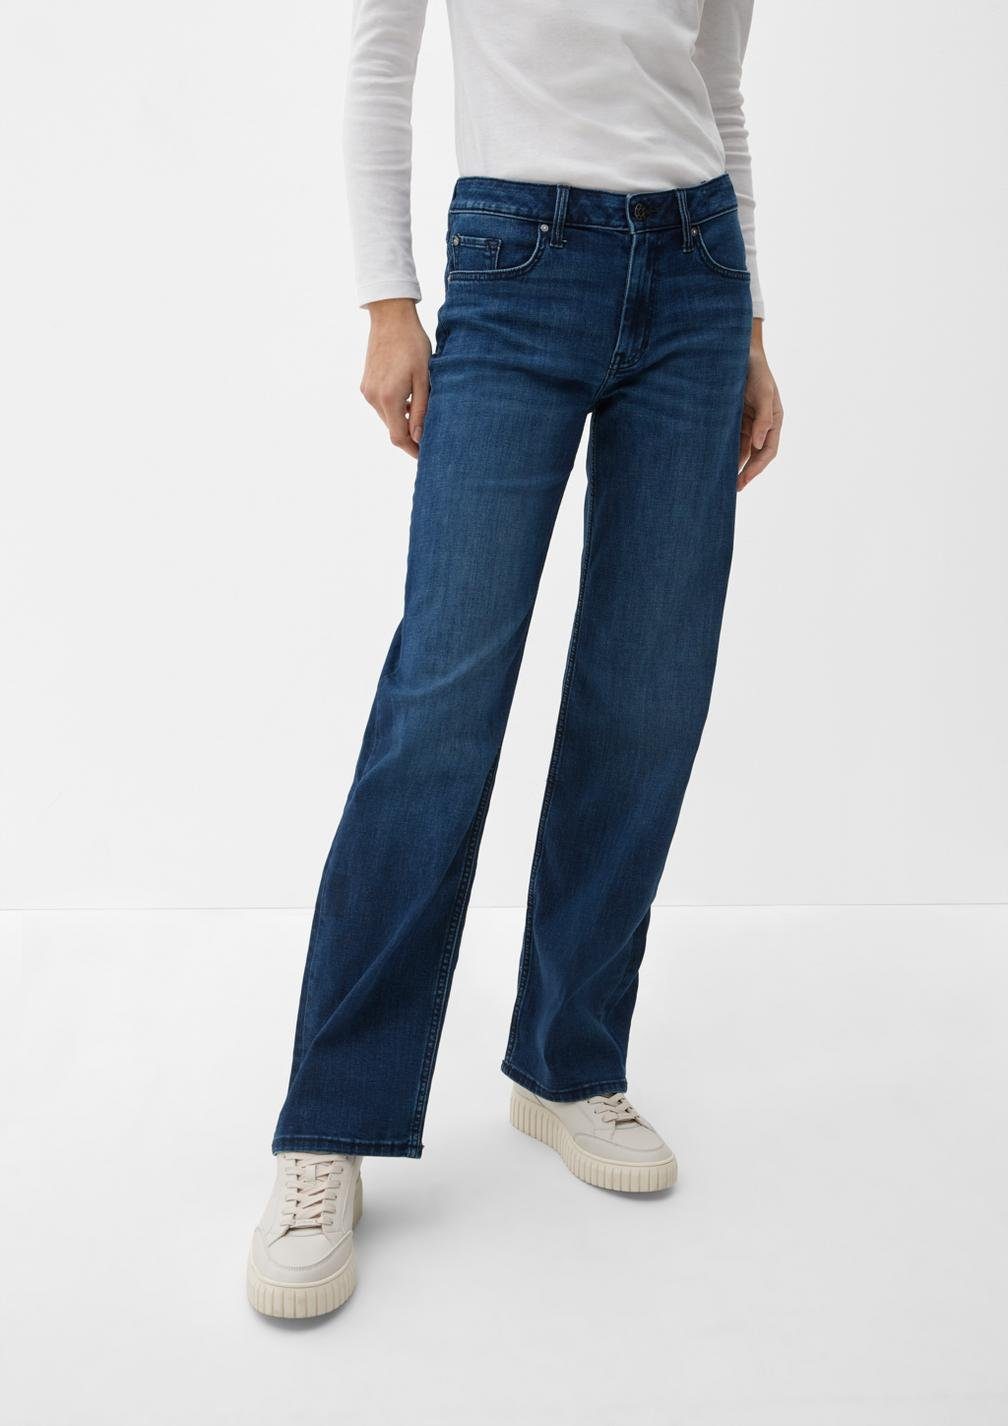 s.Oliver Comfort-fit-Jeans / Leg KAROLIN Fit Relaxed / Straight leichter tiefblau rise mit Waschung, Mid